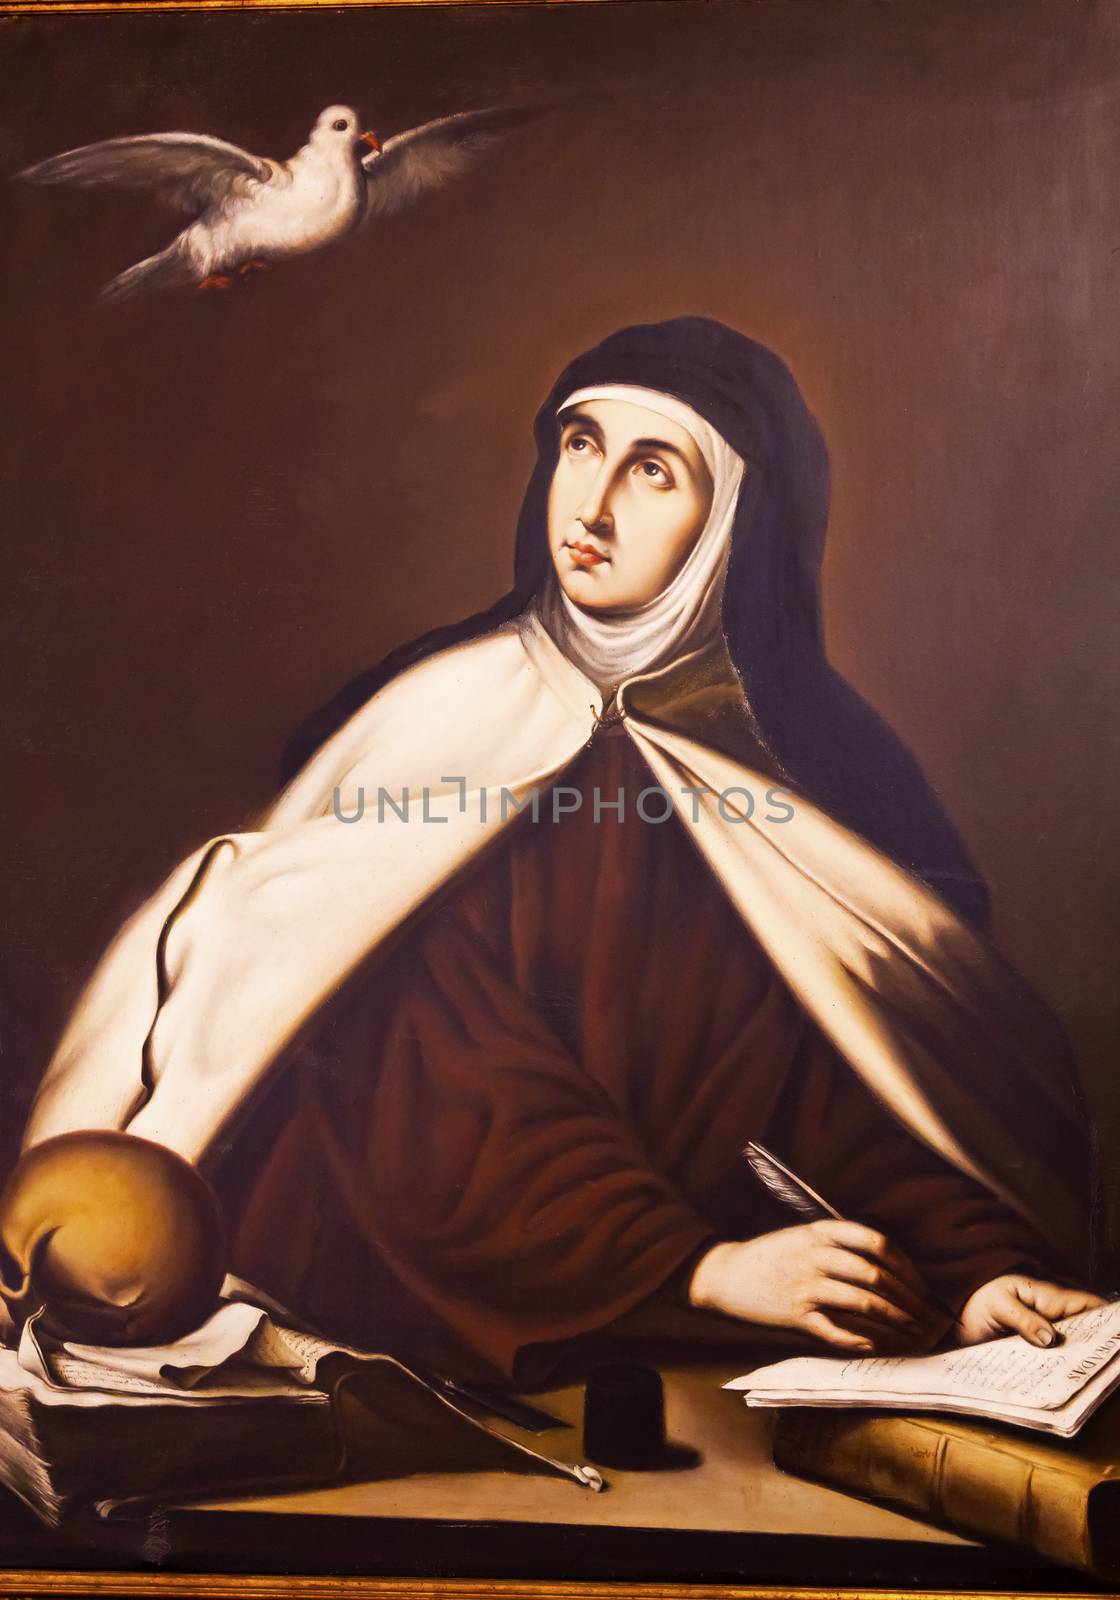 Saint Teresa Painting Convento de Santa Teresa Avila Castile Spain.  Convent founded in 1636 for Saint Teresa, Catholic nun, Counterreformation author, and Spanish mystic, who founded the Carmelite order. Died in 1582 and made a saint in 1614.